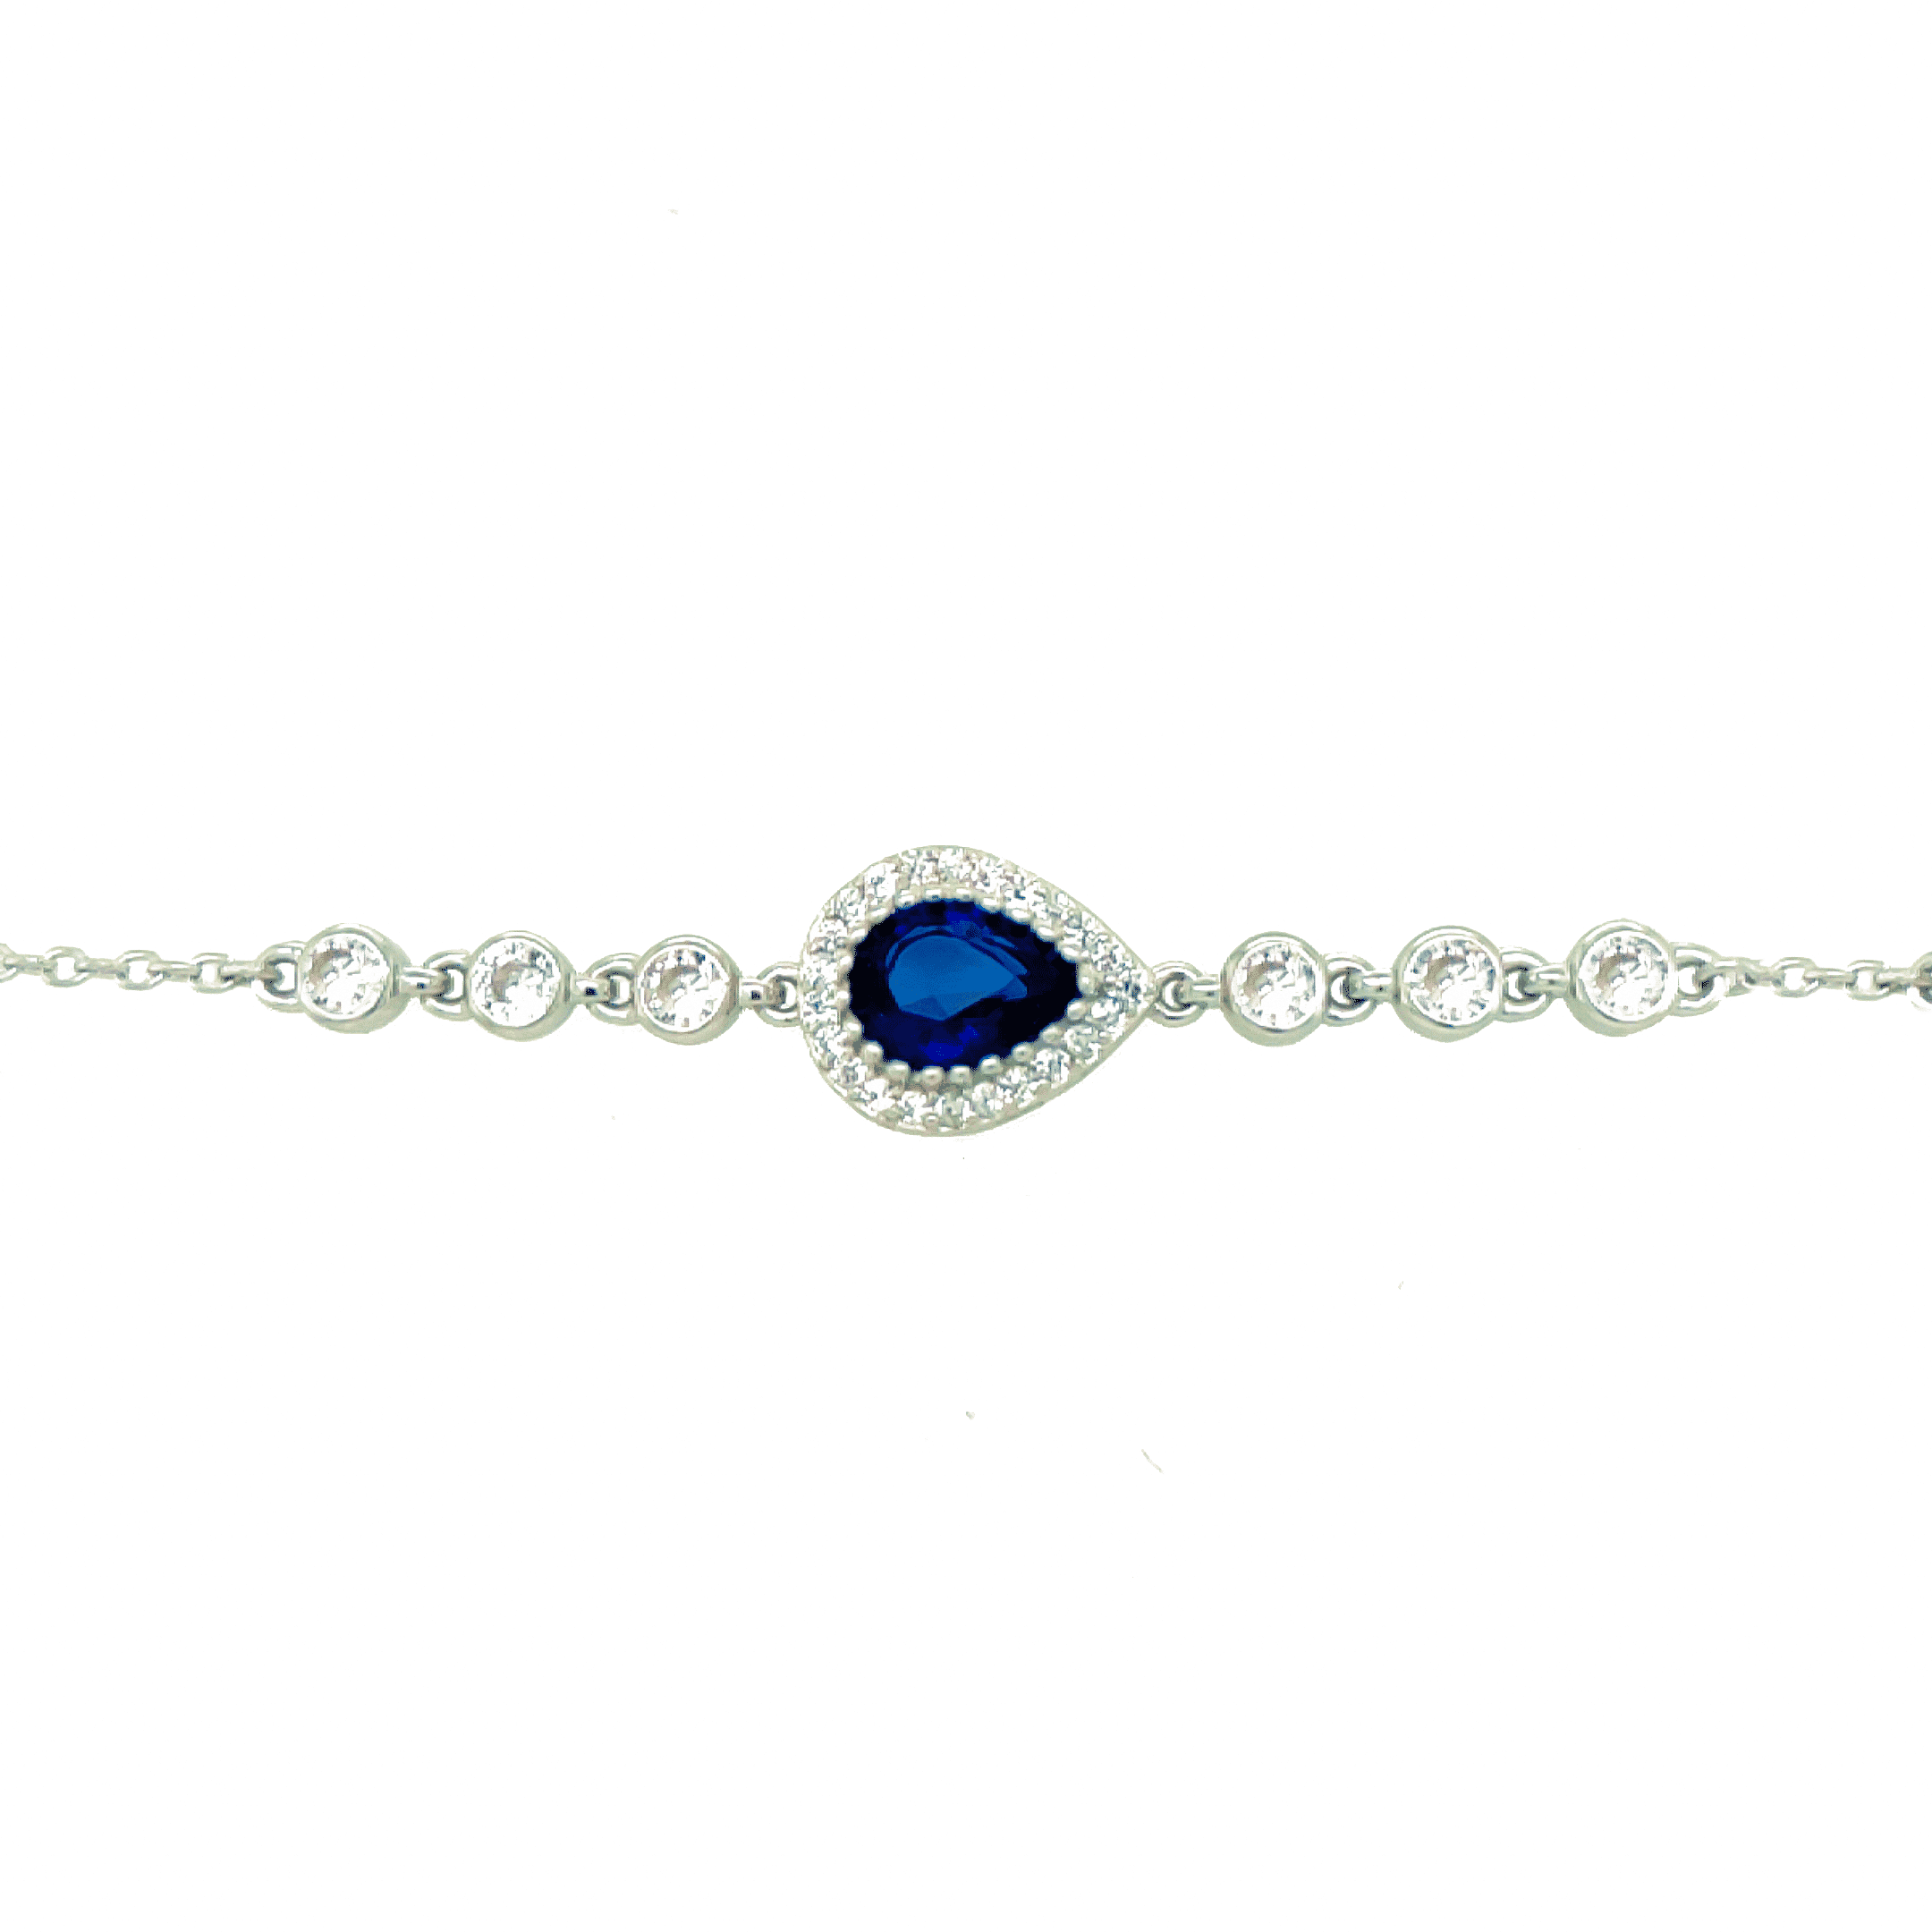 Asfour rounded + pear Zircon Stone 925 Silver Chain-Bracelet - B1924-A